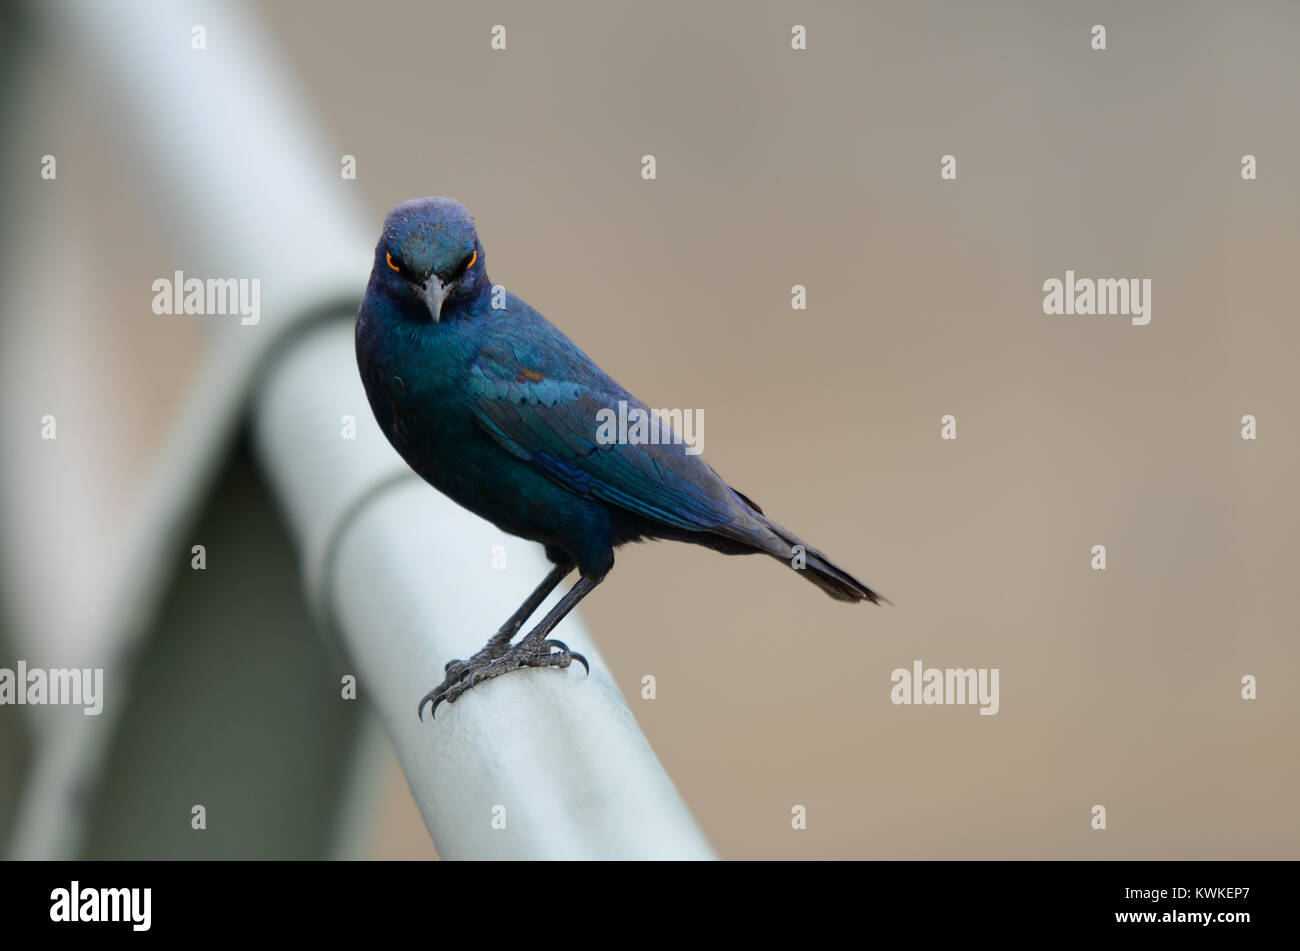 A Glossy Starling bird stares intently at the camera with a fierce look. The bird sits on a railing with its head turned directly towards the camera. Stock Photo